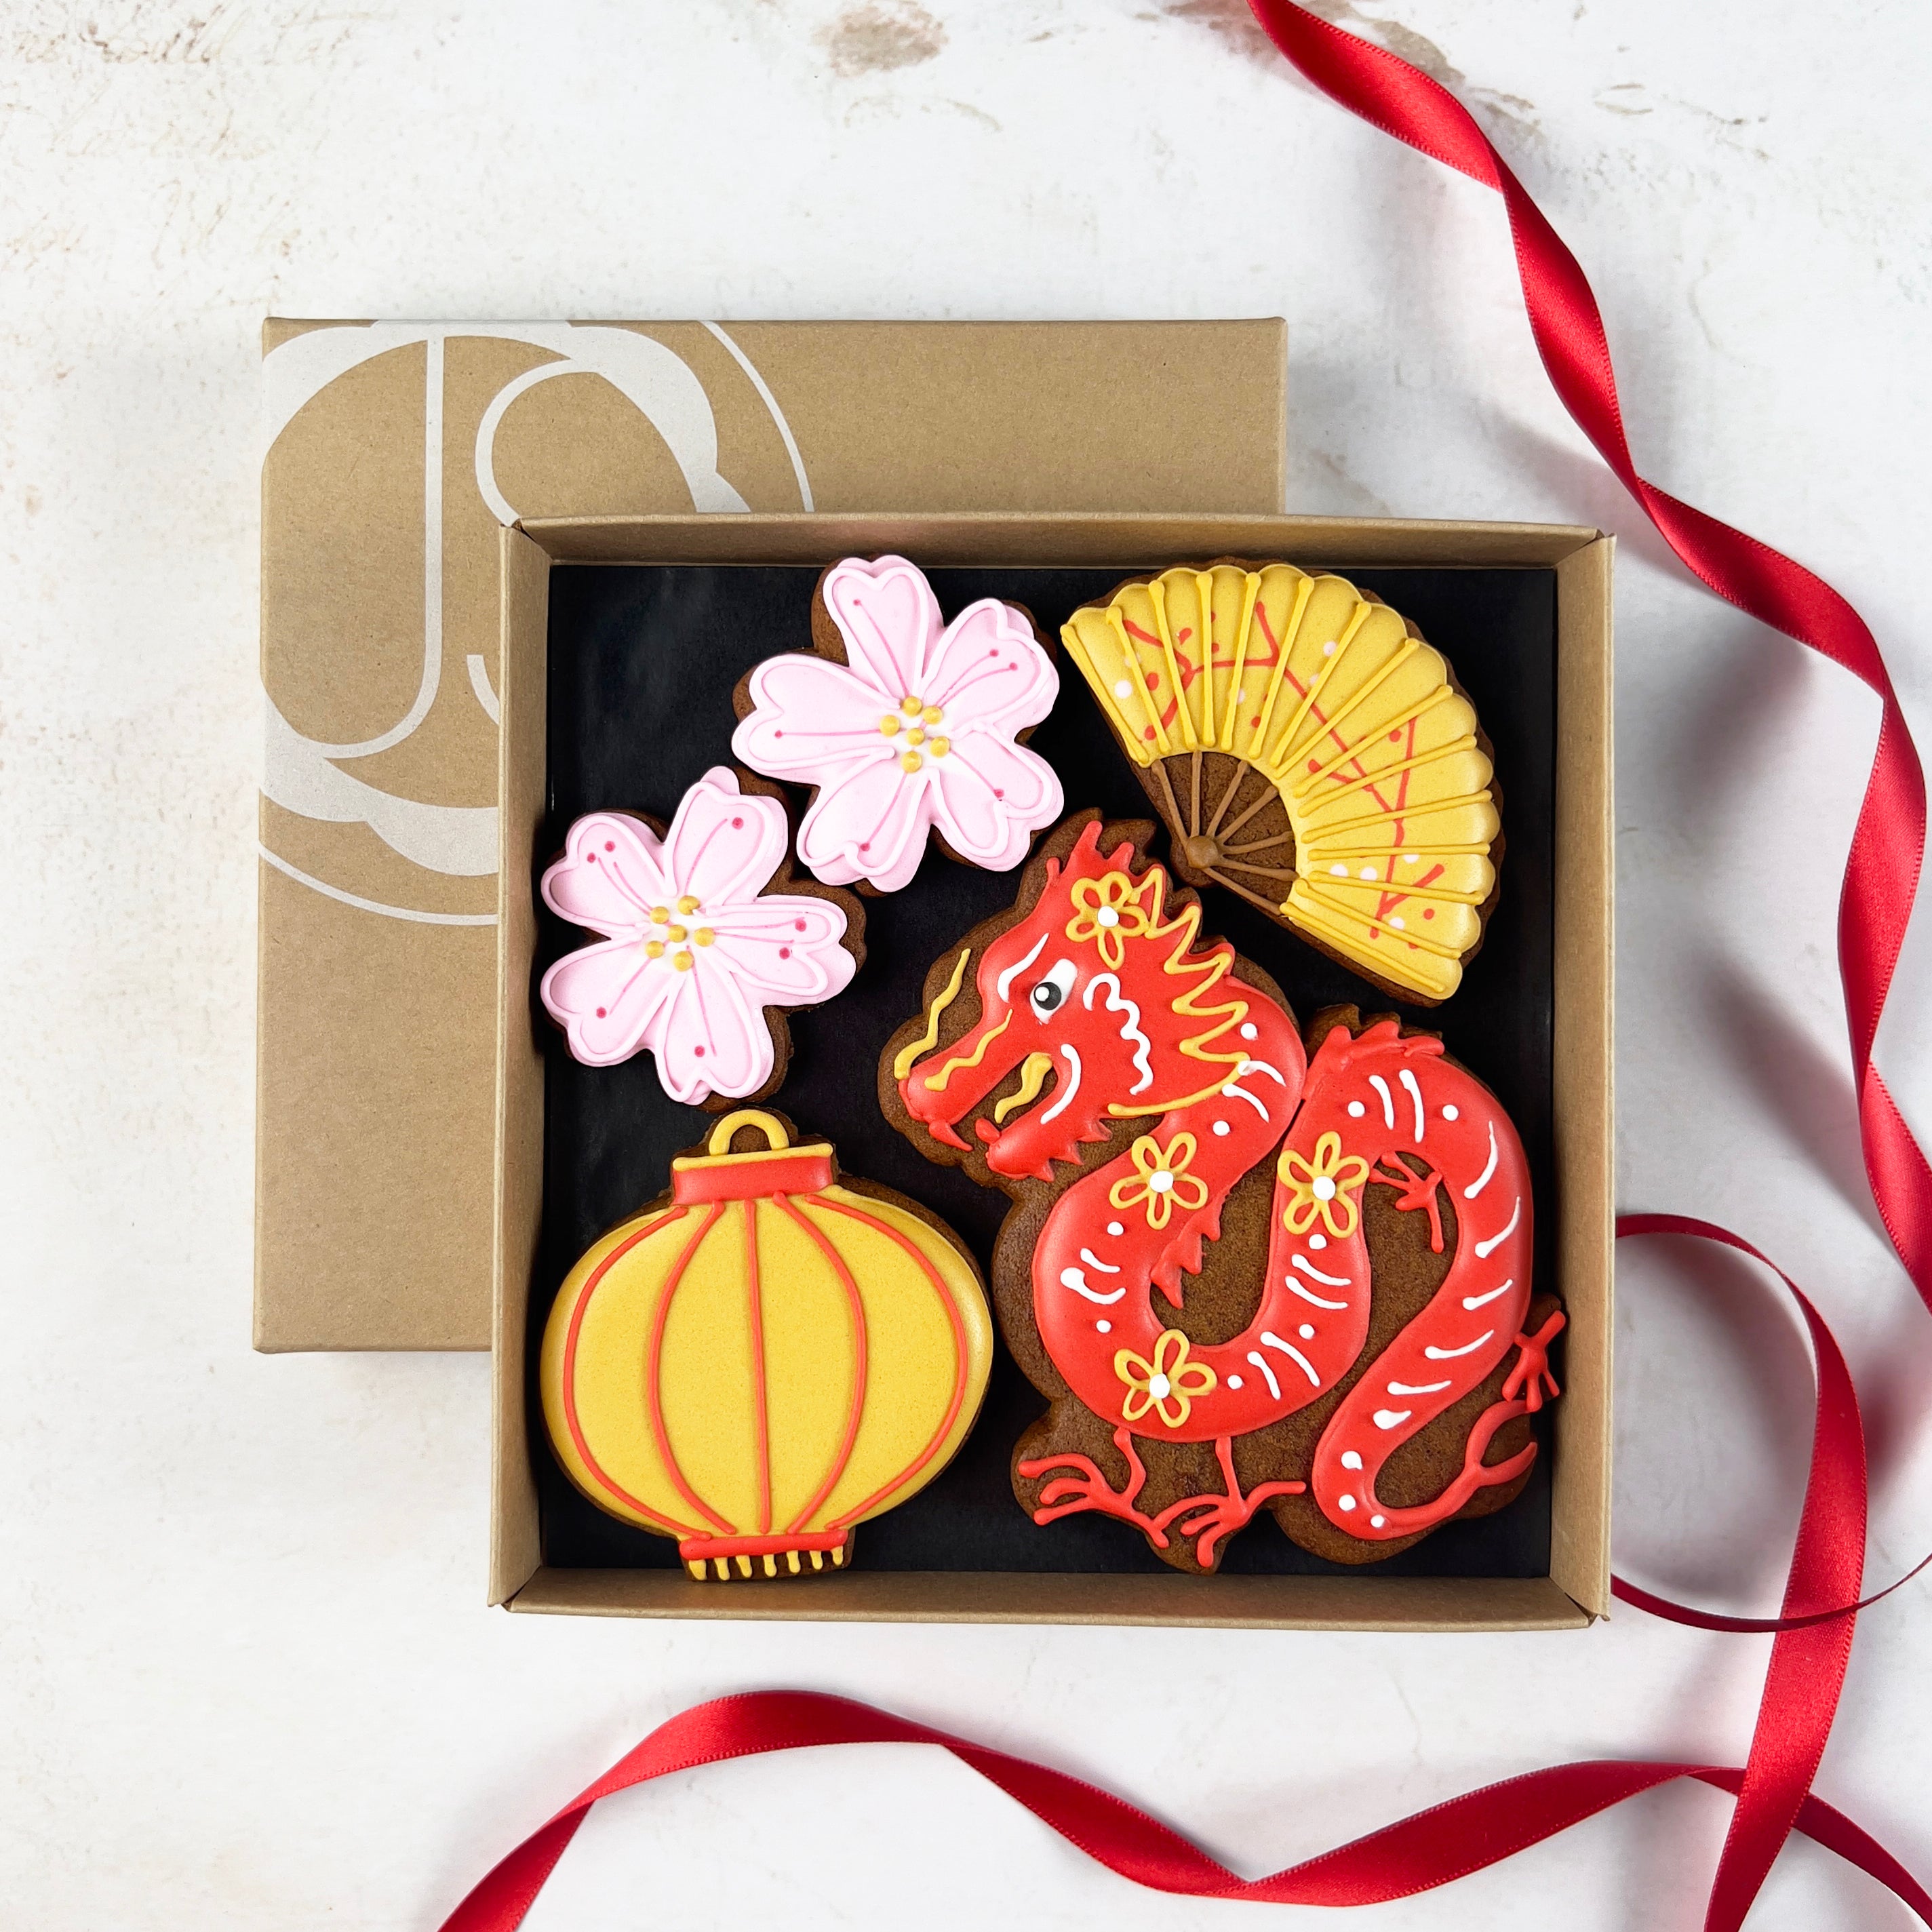 Chinese New Year Biscuit Box